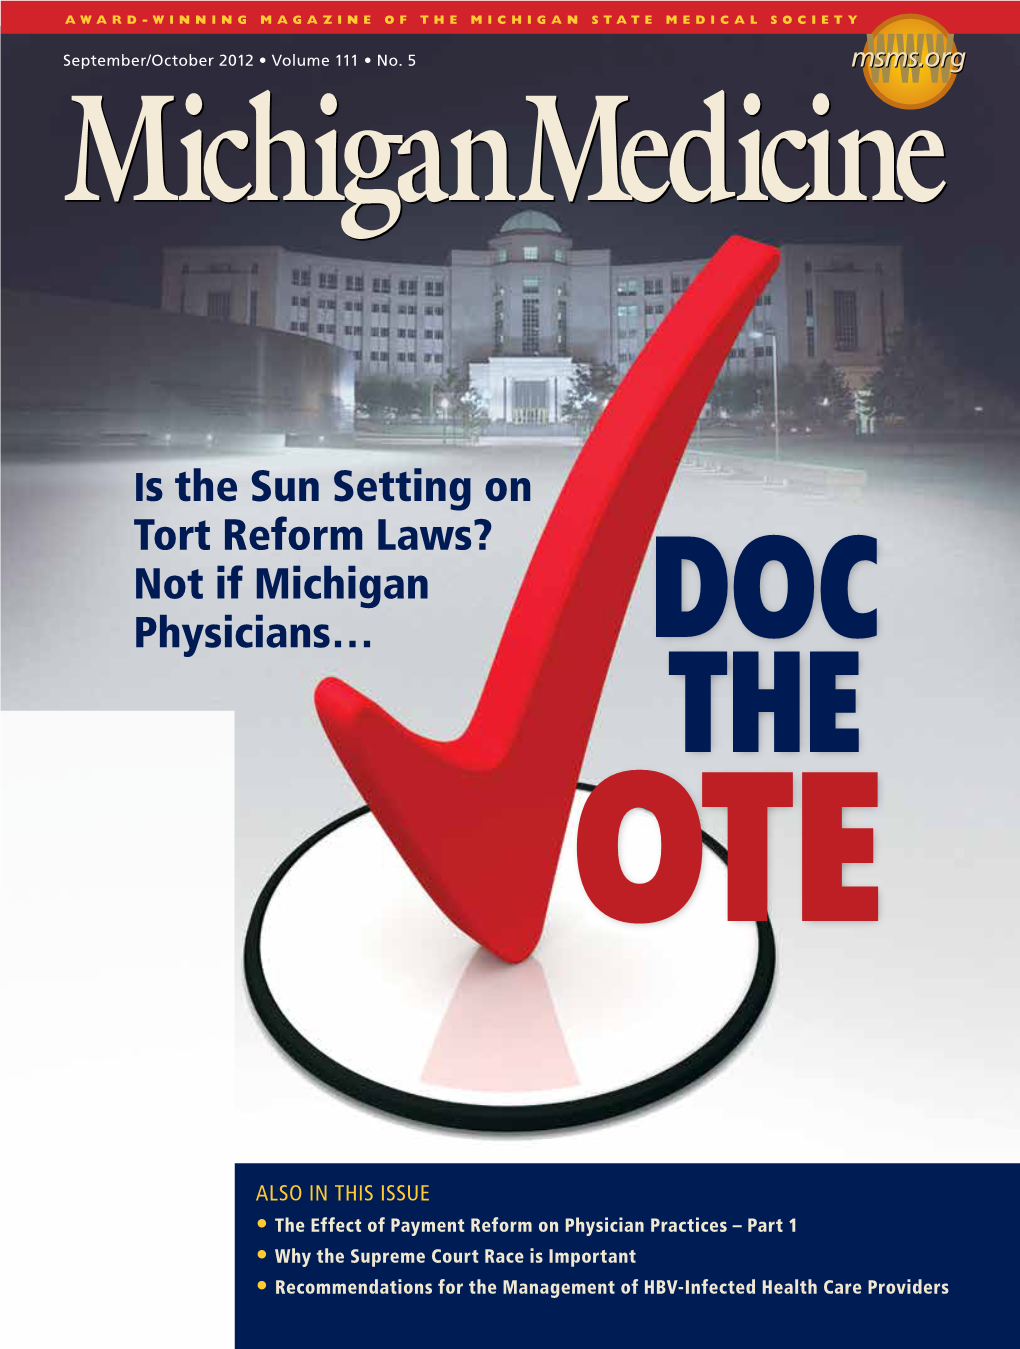 Is the Sun Setting on Tort Reform Laws? Not If Michigan Physicians… Doc the Ote